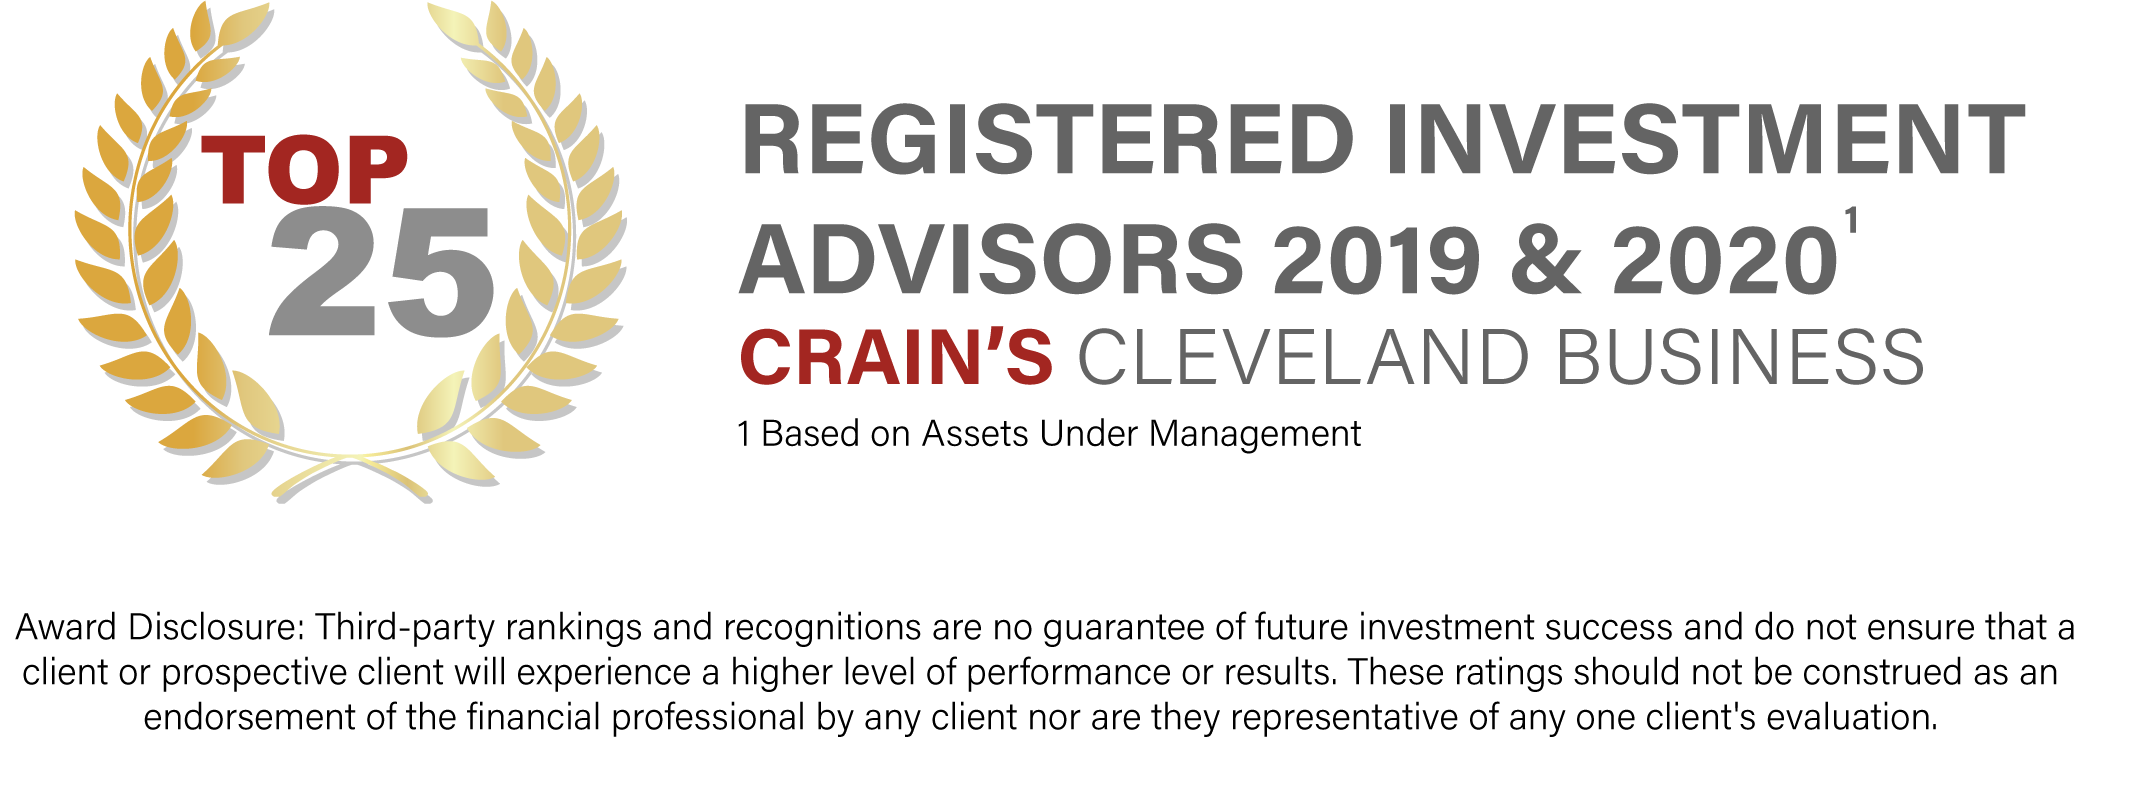 Crain's Cleveland Business Top 25